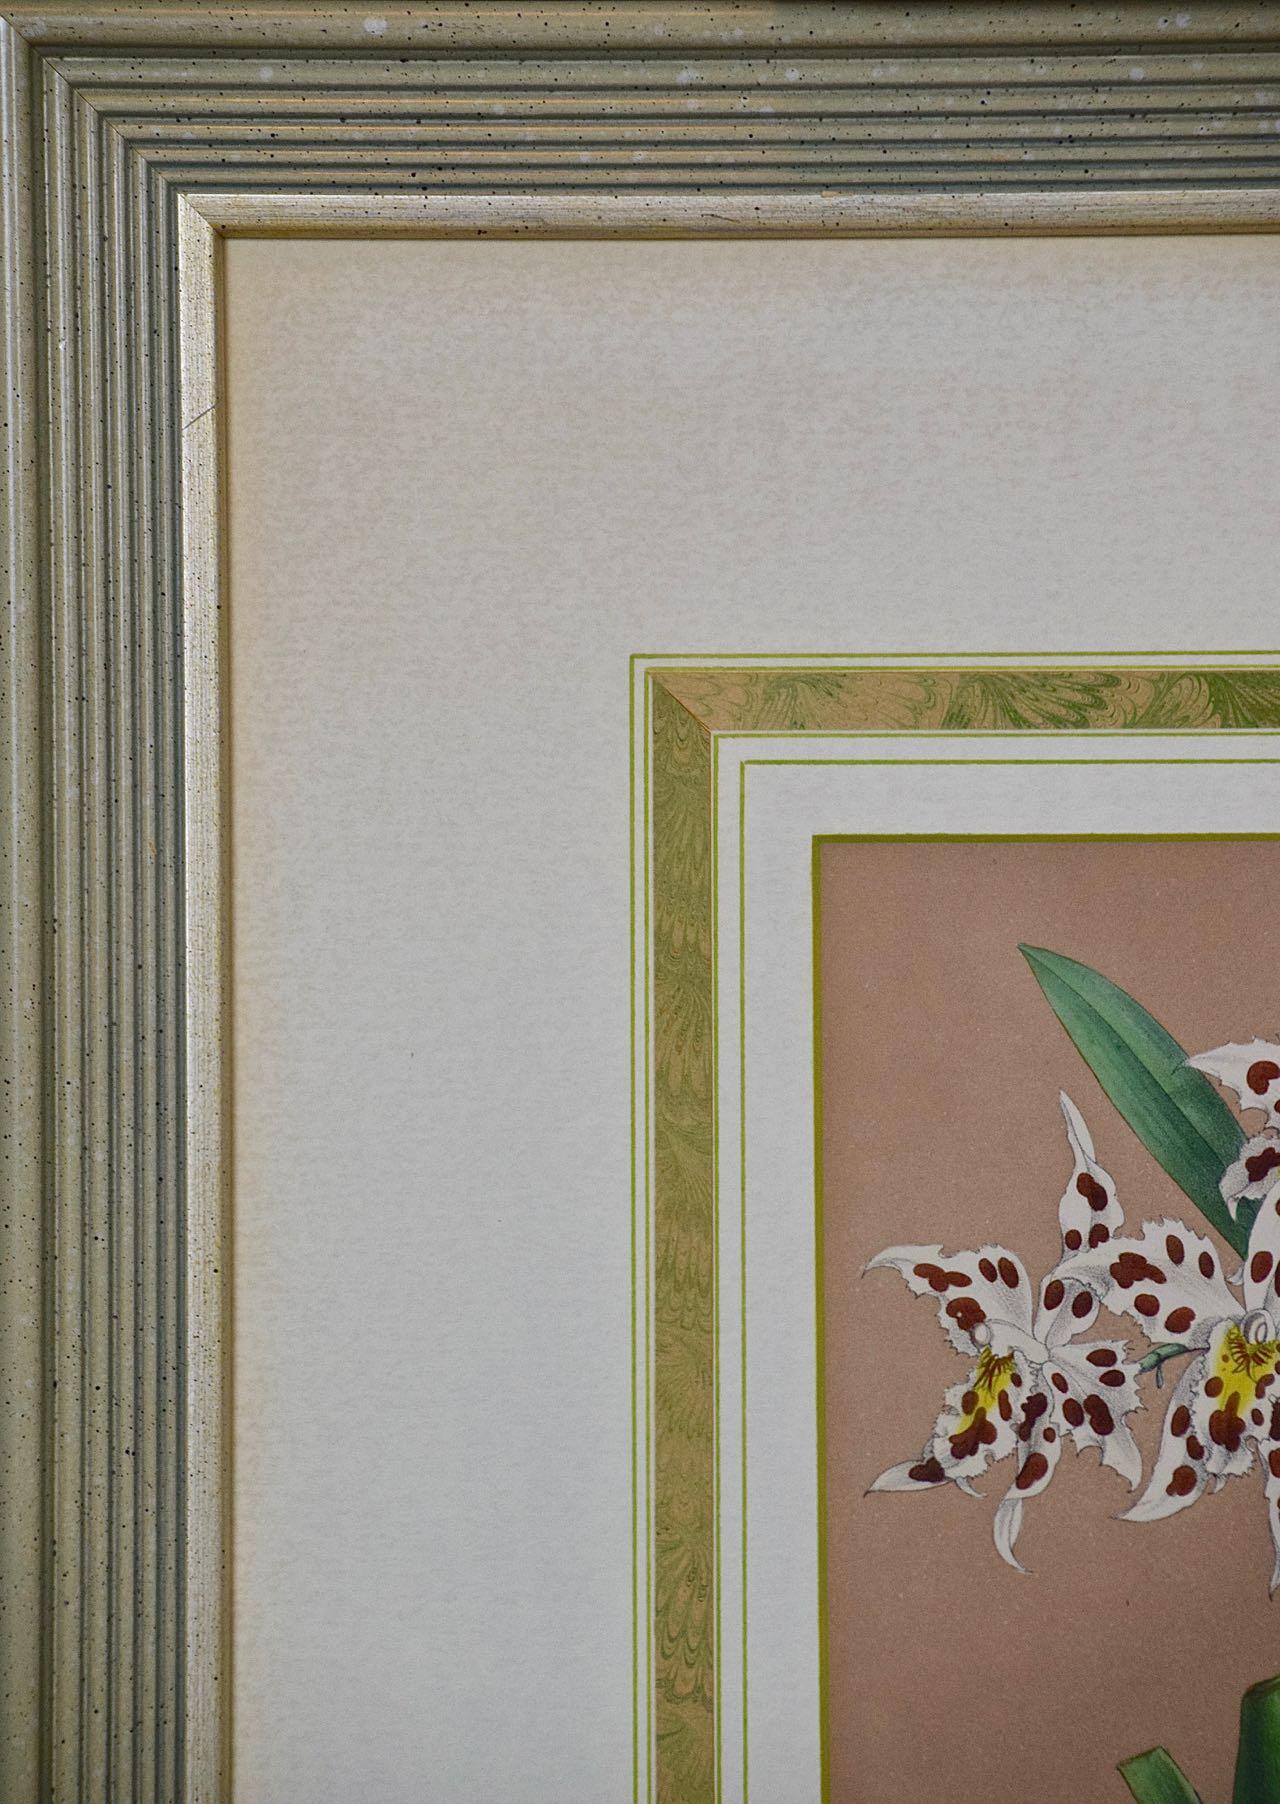 This beautiful, original hand-colored orchid lithograph entitled 